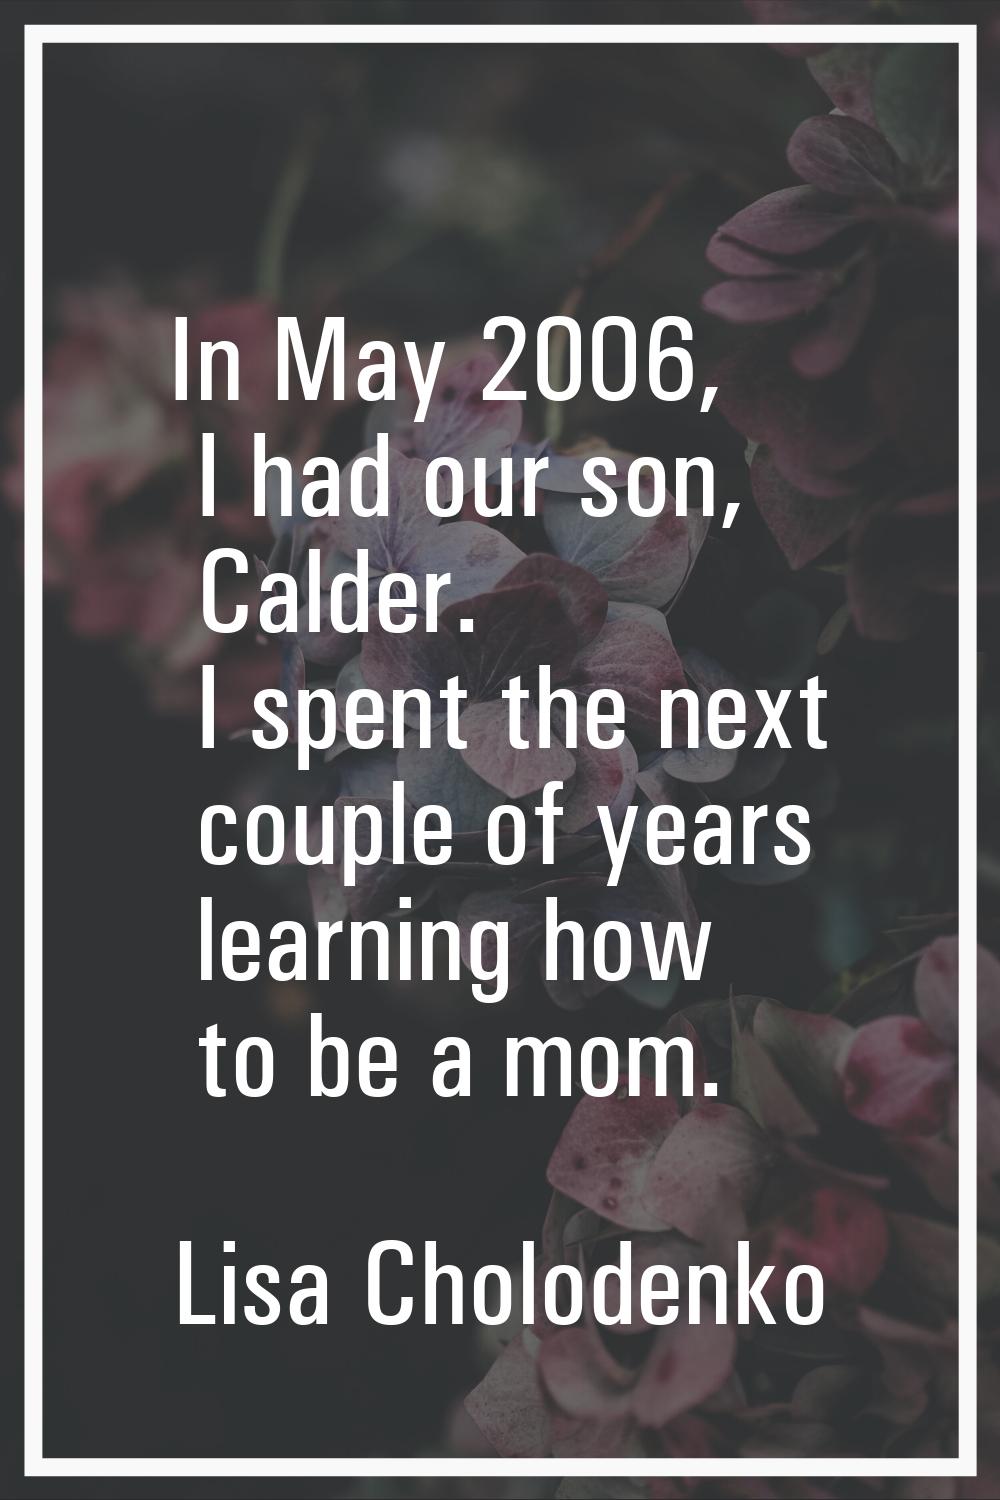 In May 2006, I had our son, Calder. I spent the next couple of years learning how to be a mom.